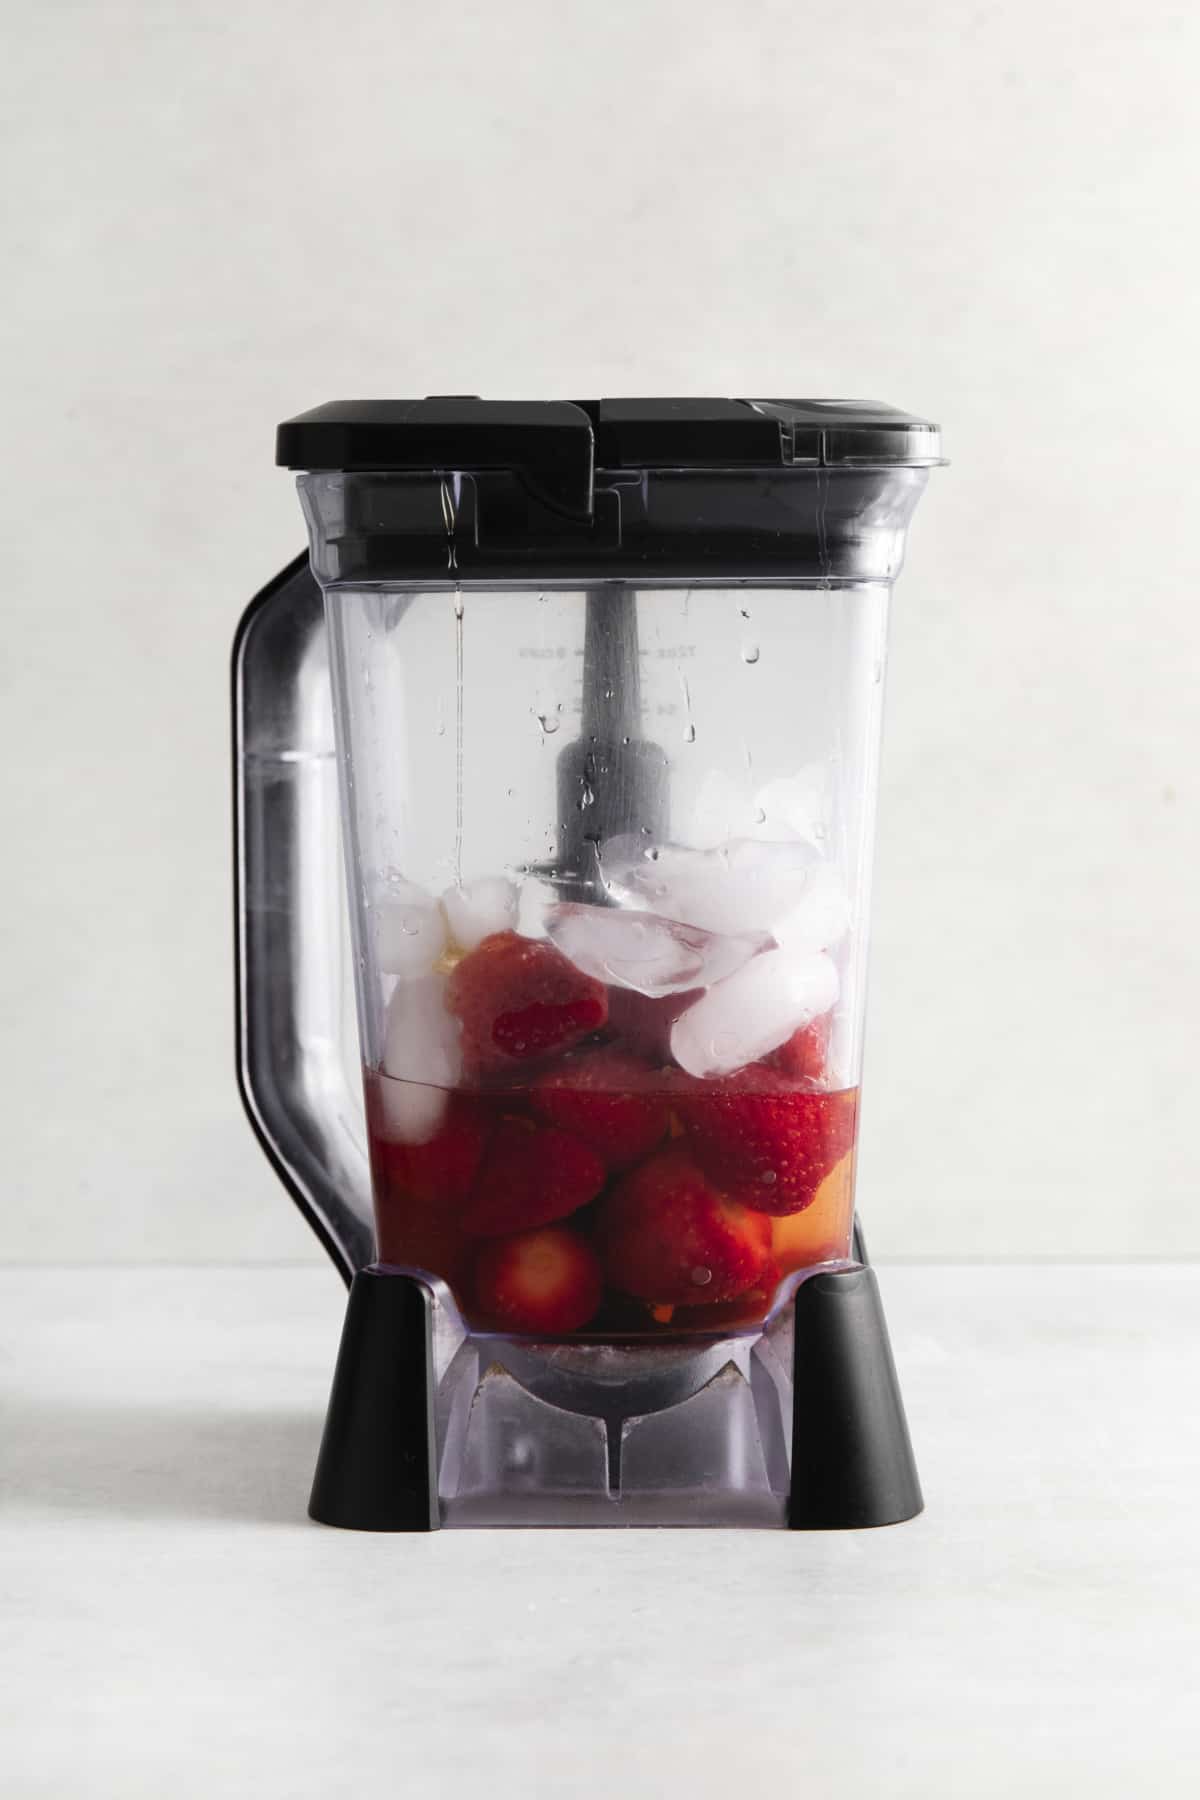 Put strawberries and ice in a blender.